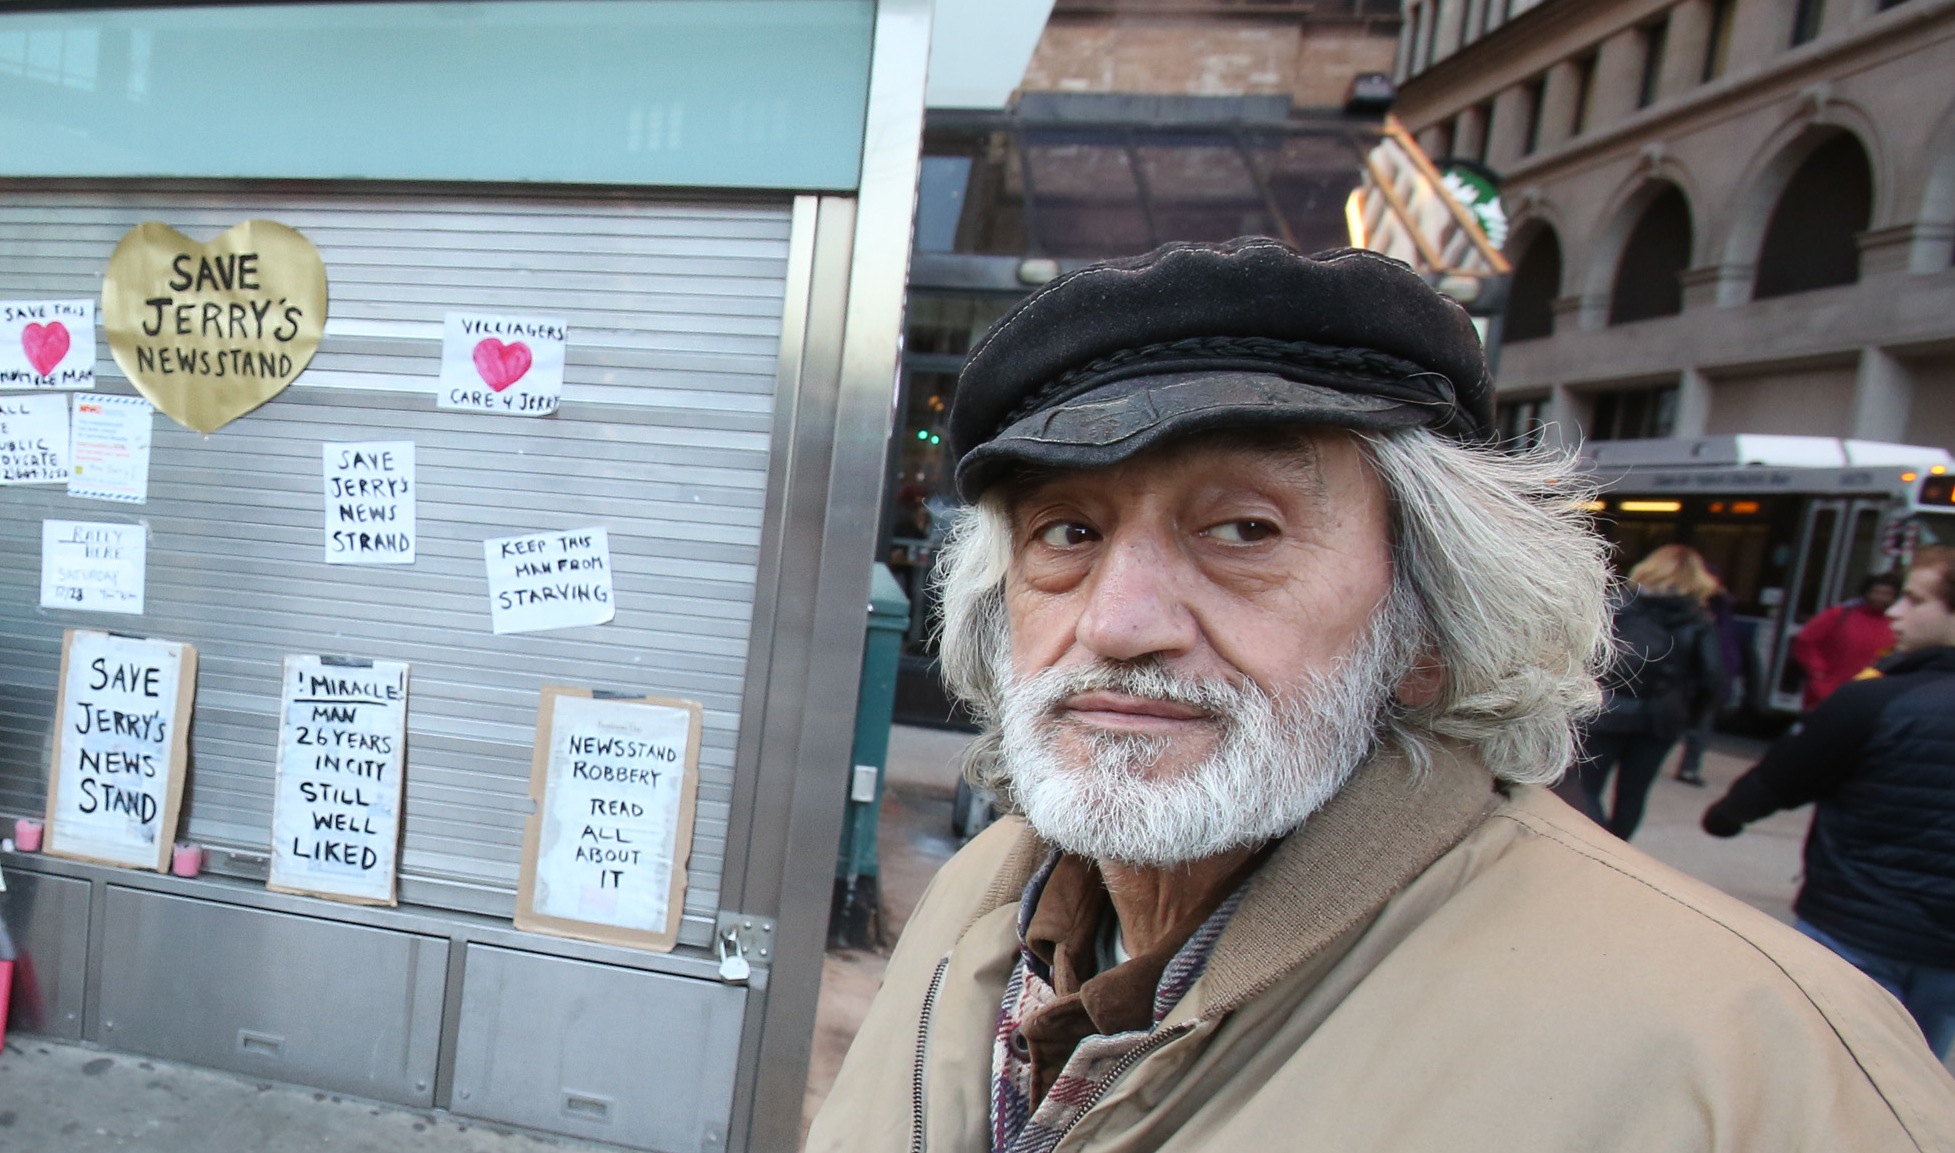 Jerry Delakas has operated the newsstand at Astor Place and Fourth Ave. for 27 years.